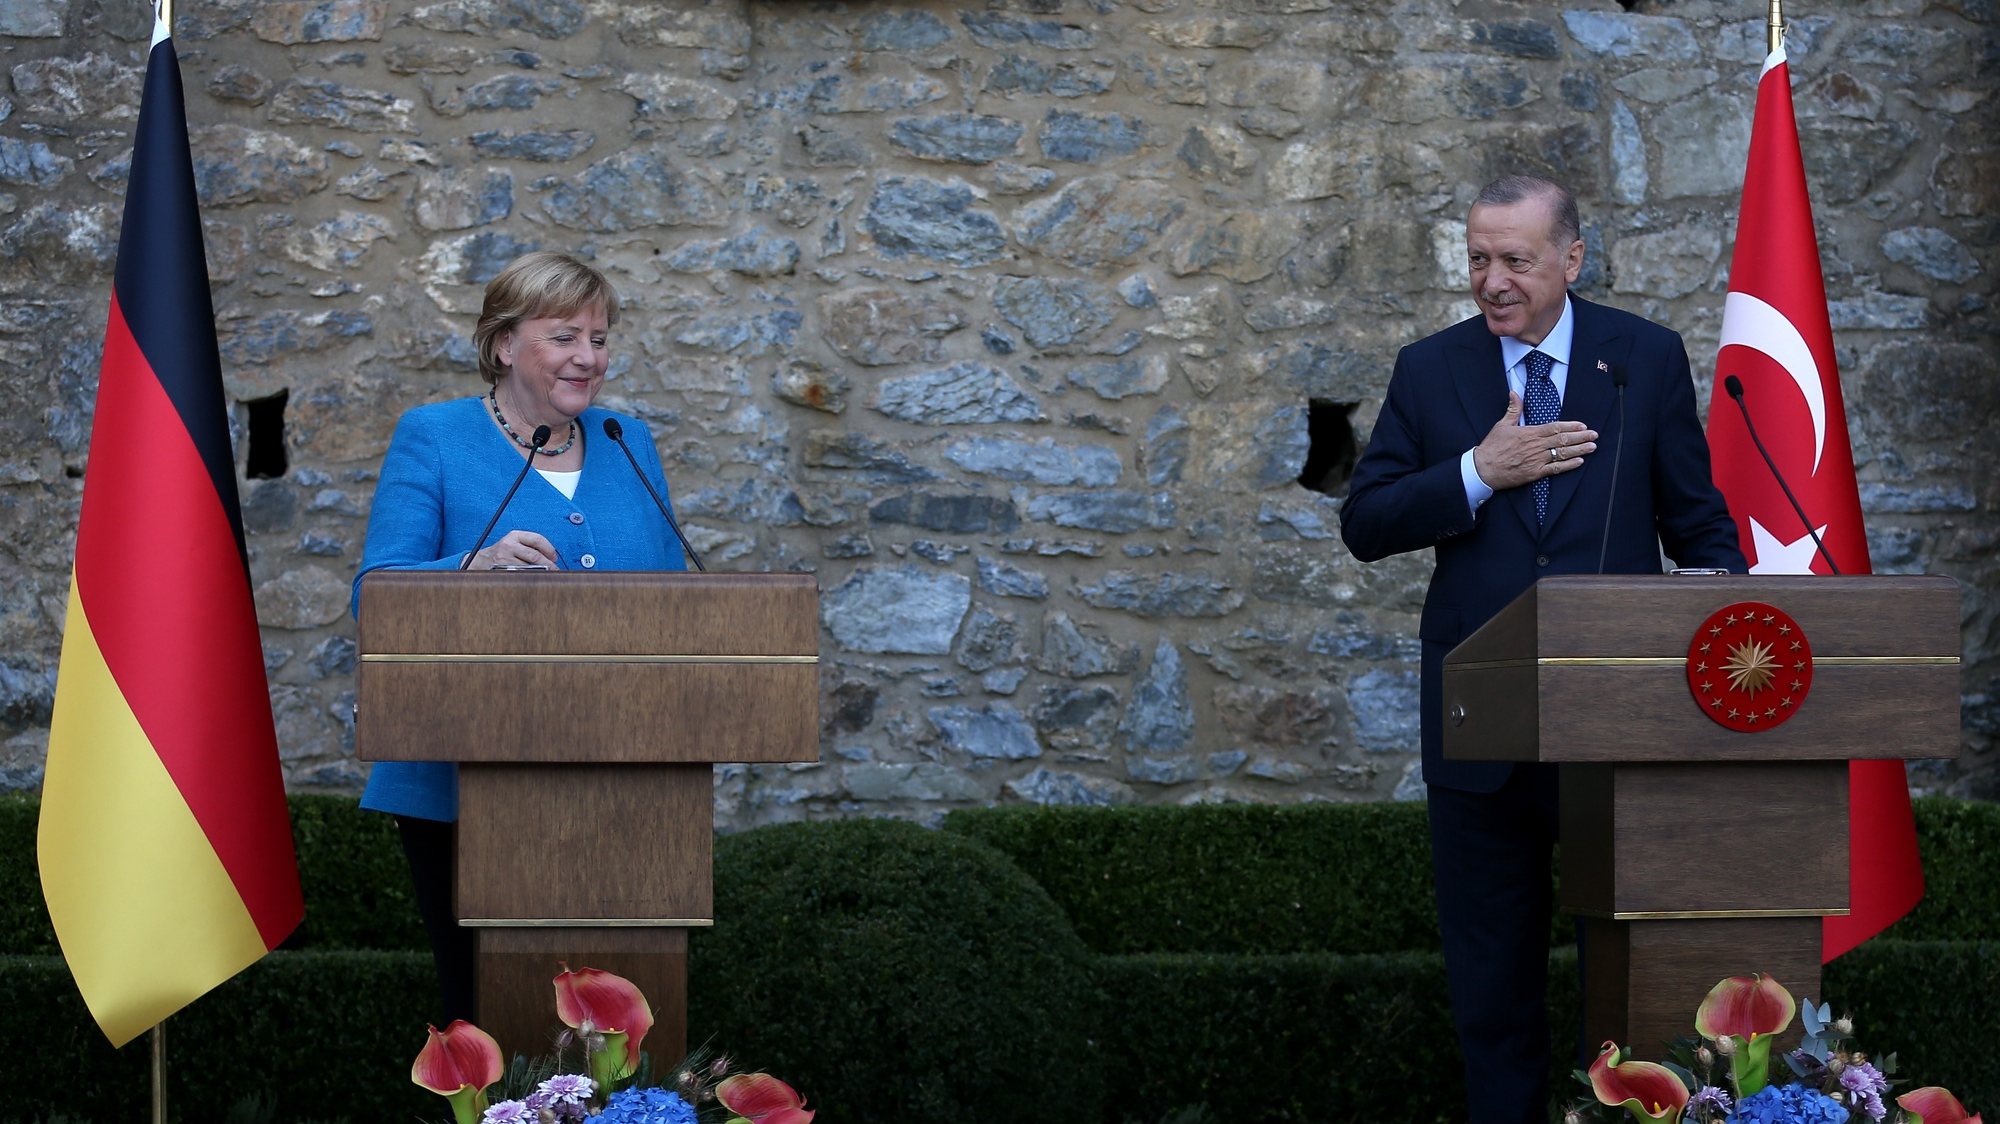 epa09526912 Turkish President Recep Tayyip Erdogan (R) and German Chancellor Angela Merkel (L) speak during a press conference after thier meeting at the Huber mansion in Istanbul, Turkey, 16 October 2021. The German Chancellor is currently on a farewell tour of various countries.  EPA/ERDEM SAHIN